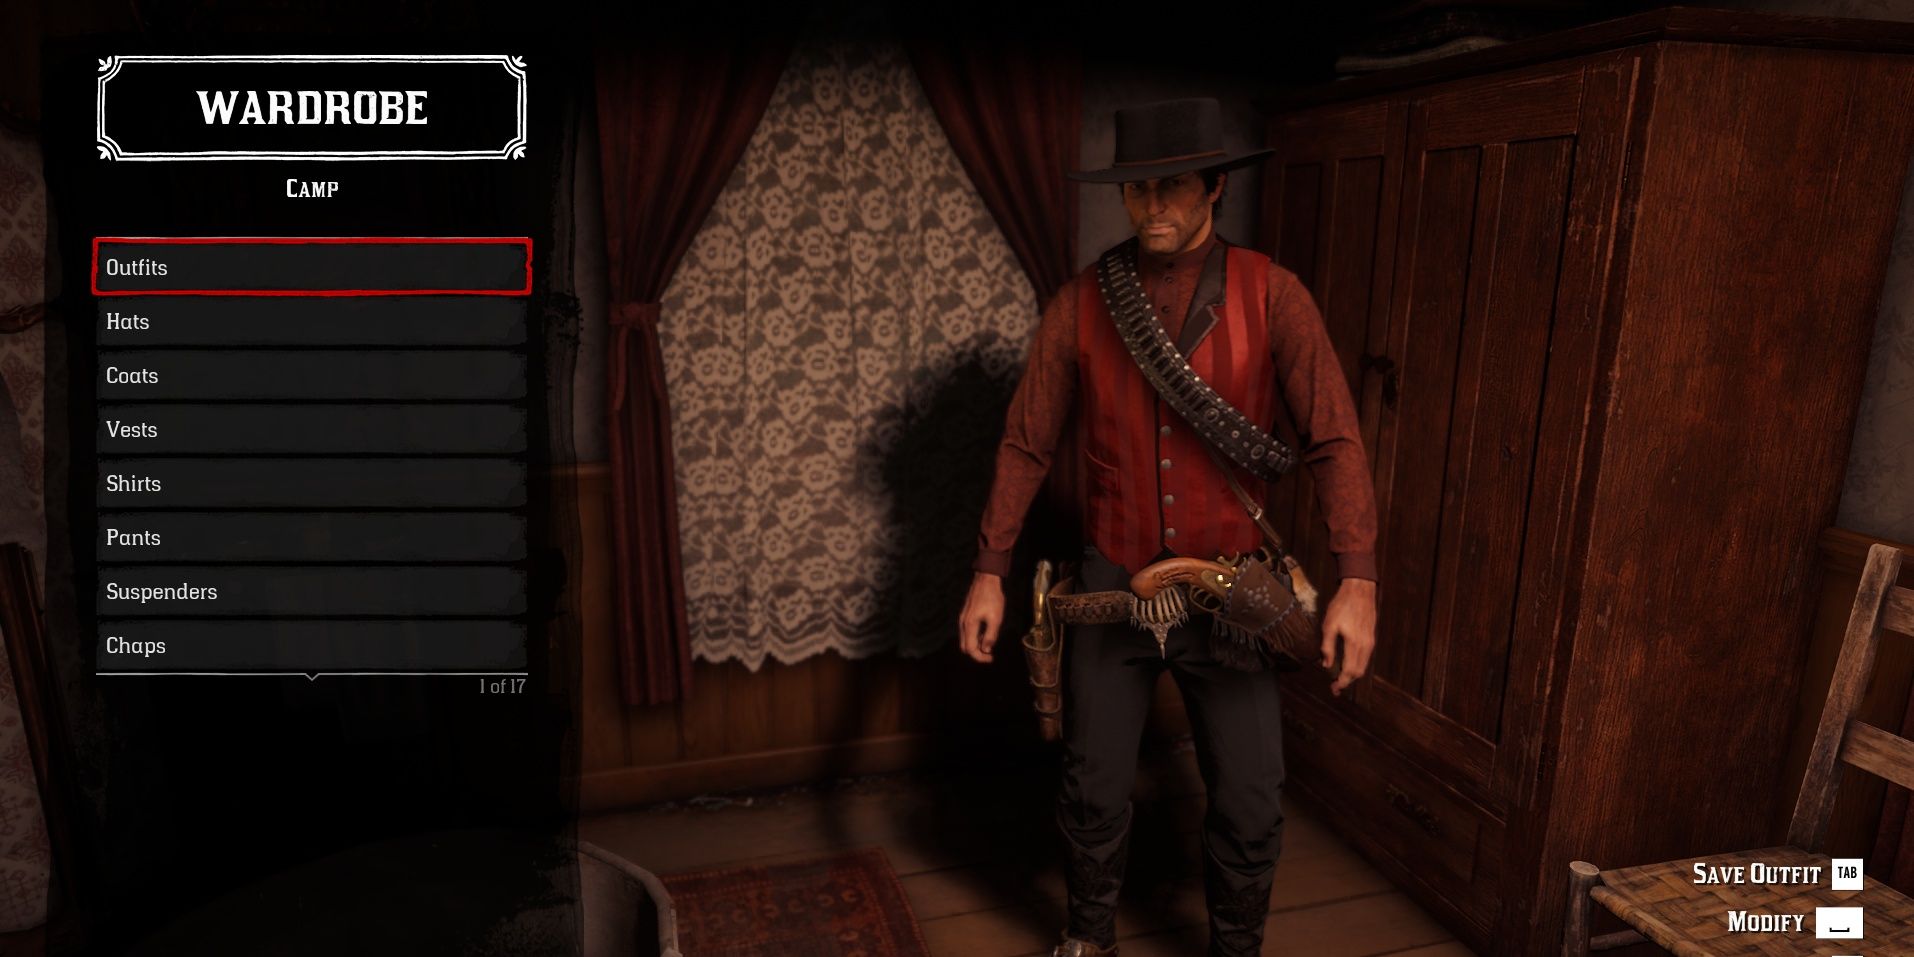 The Gambler outfit in Red Dead Redemption 2